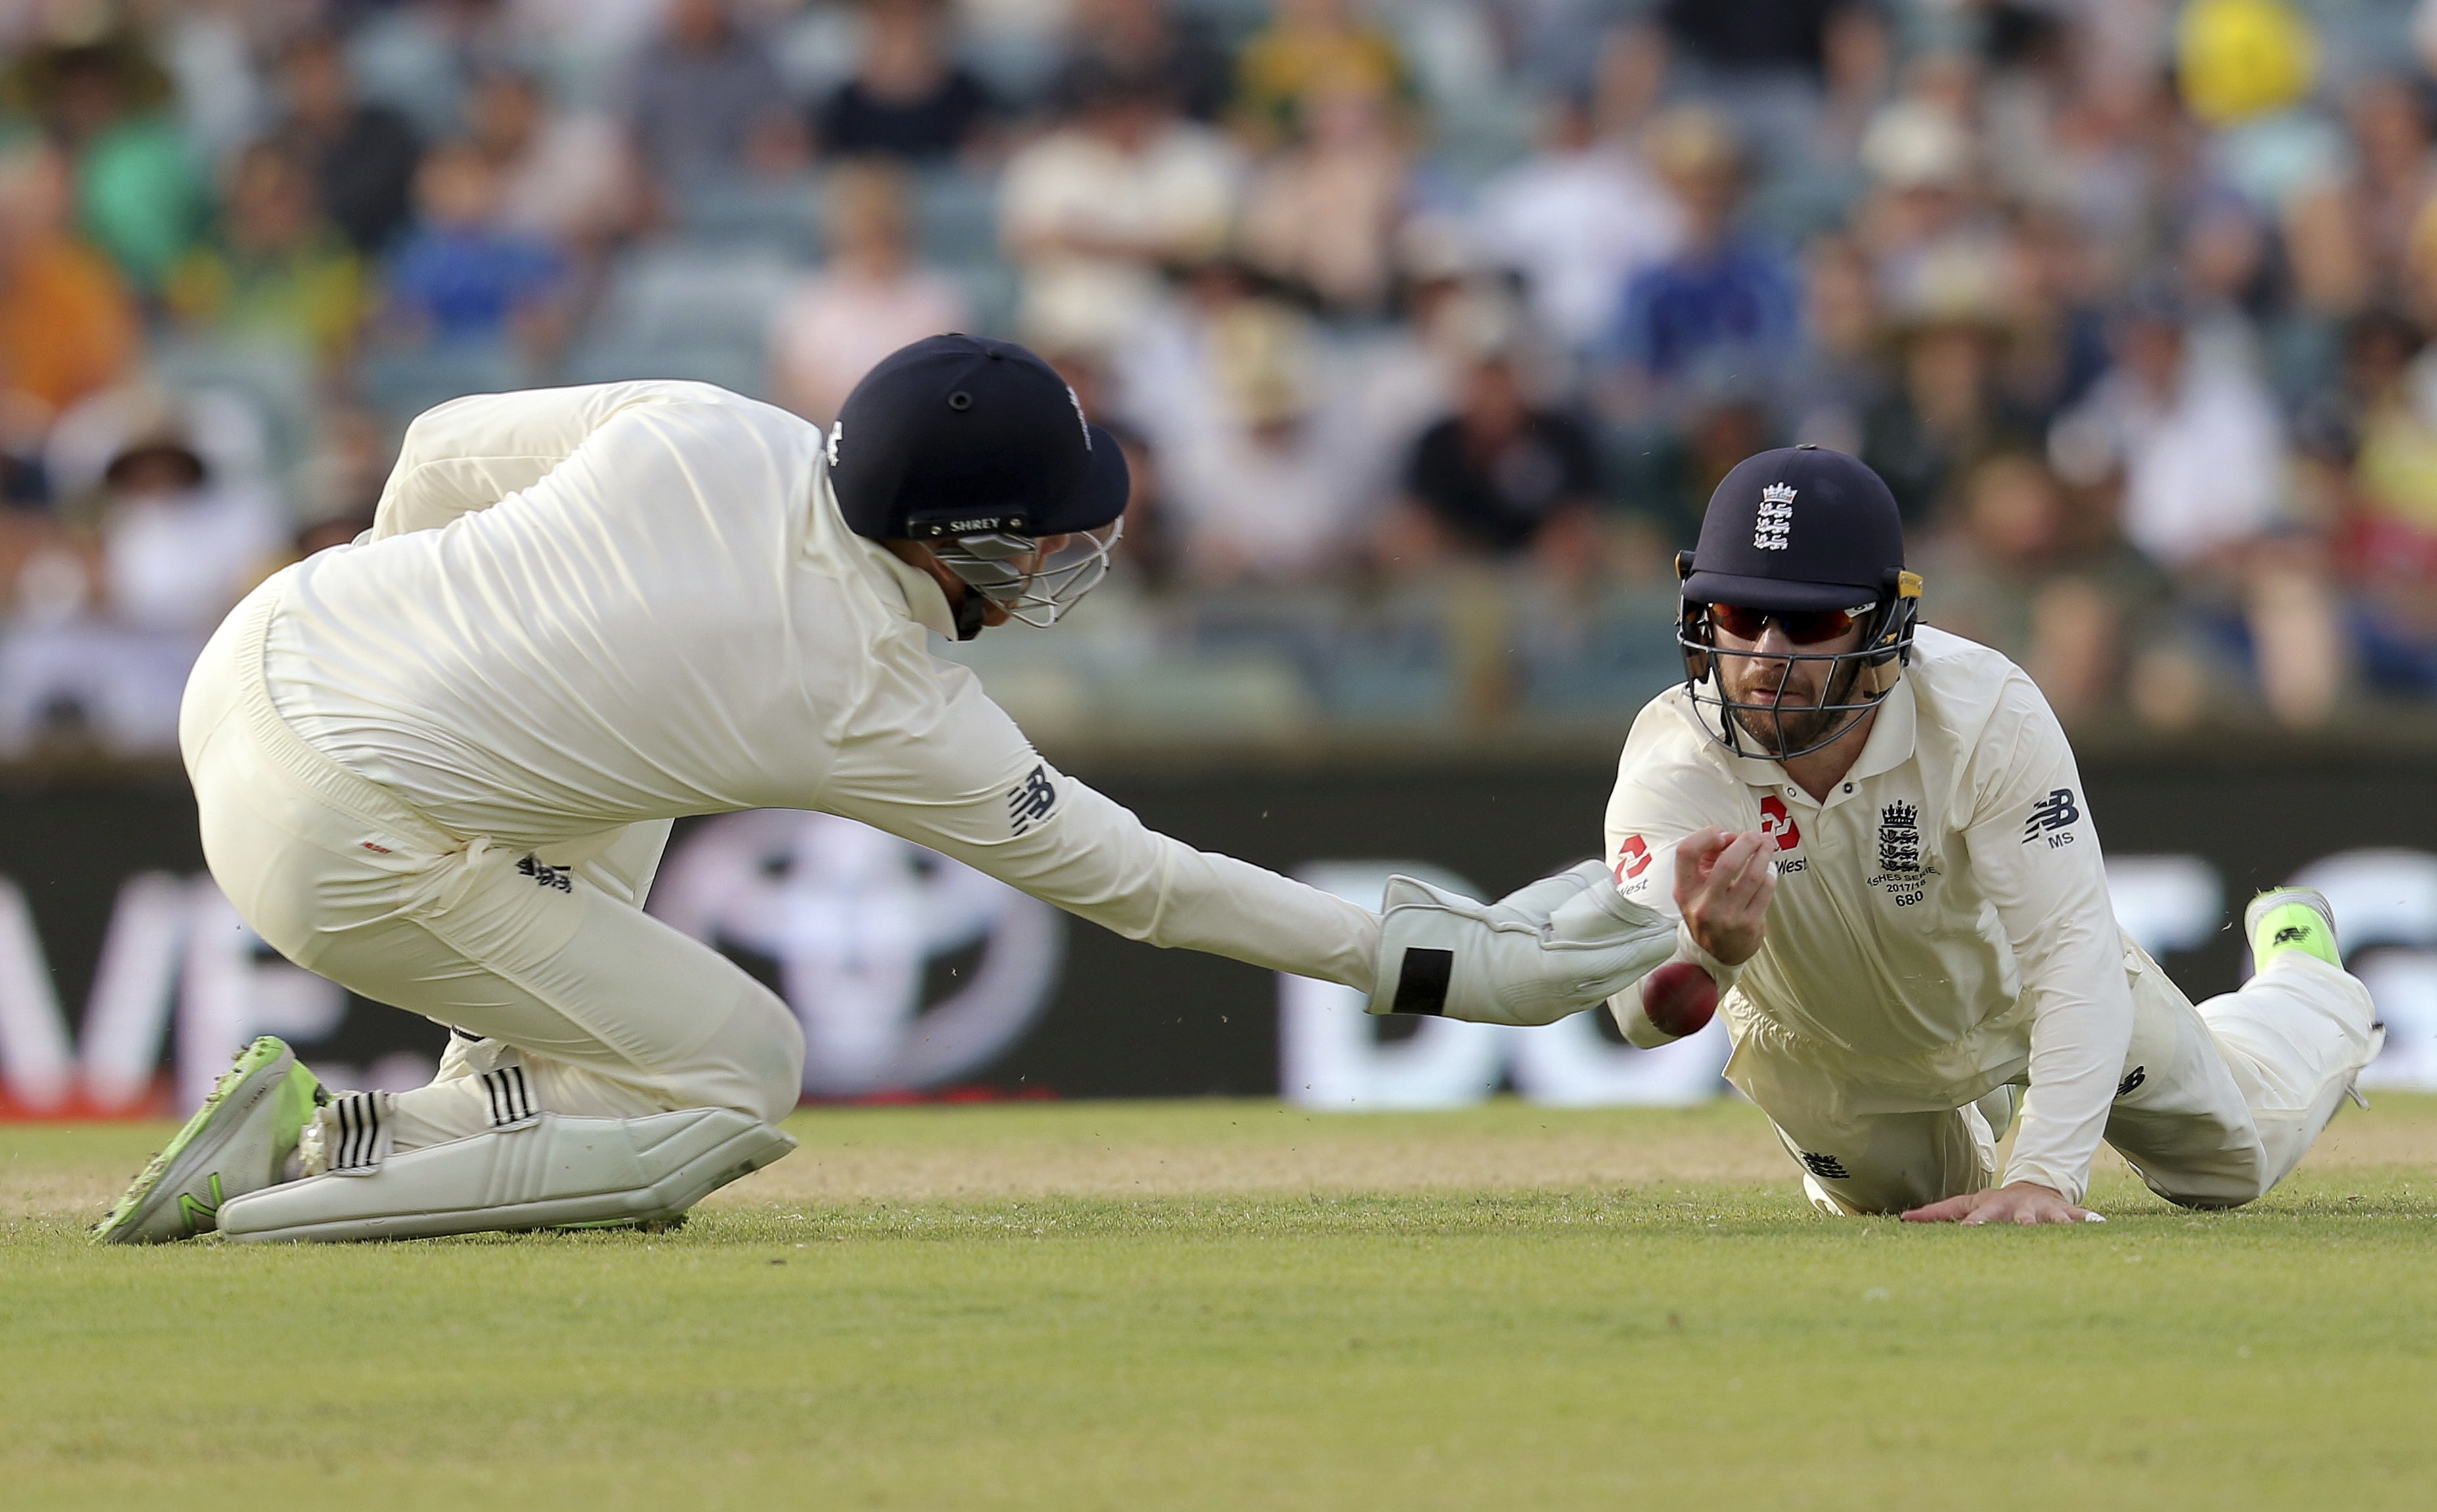 England wicketkeeper Jonny Bairstow drops a catch as the tourists lost their grip on the game. Photo: AP